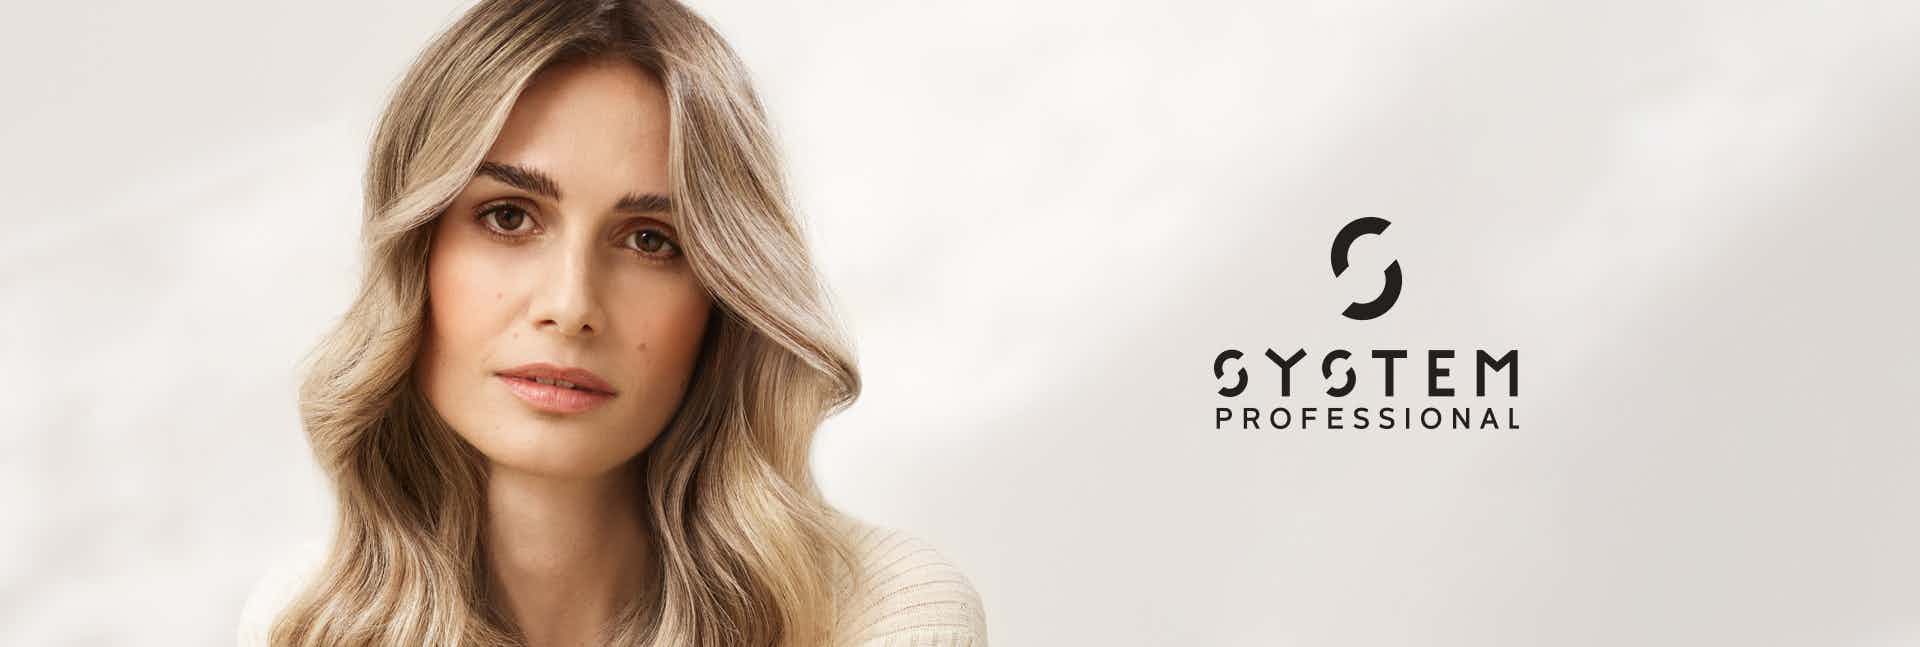 Explore System Professional hair care, hair styling and men's hair care and styling products tailored to your specific needs.